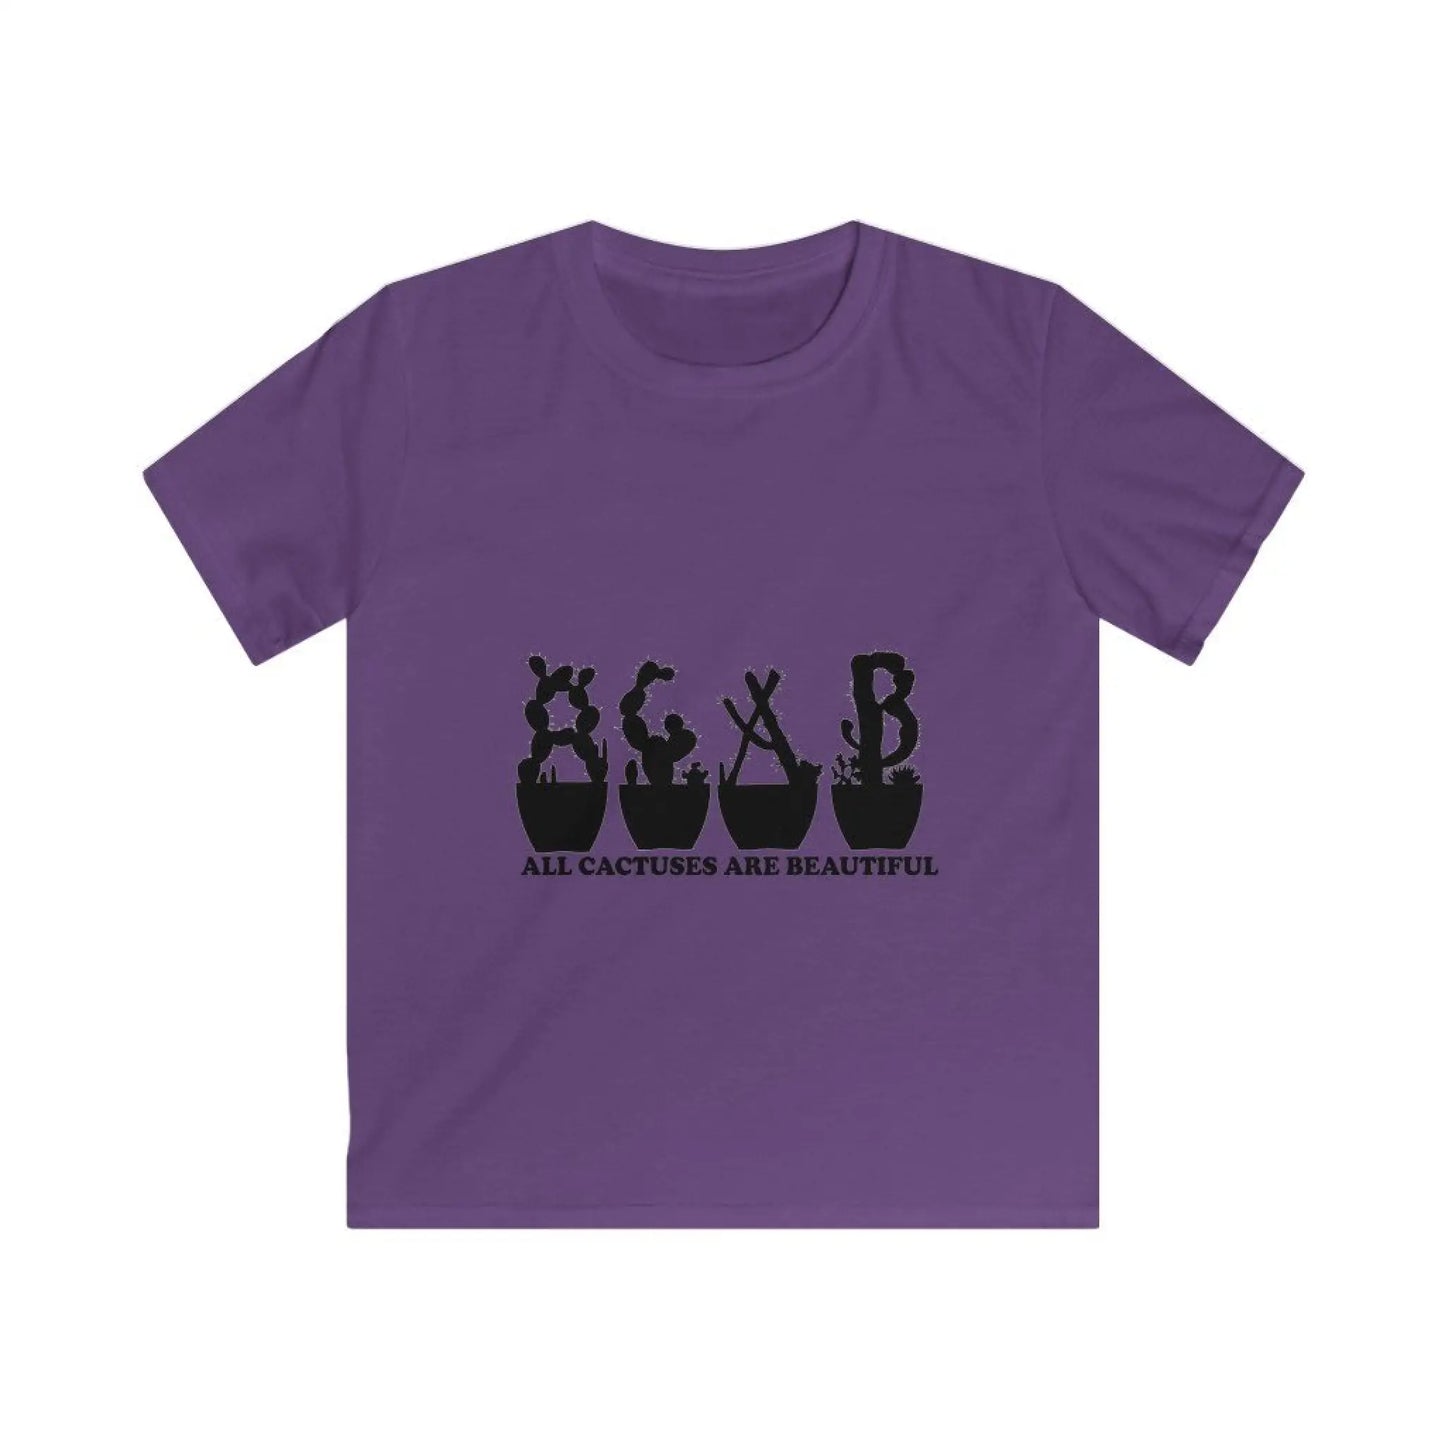 Kids Tee - All Cactuses Are Beautiful - L / Purple - clothes